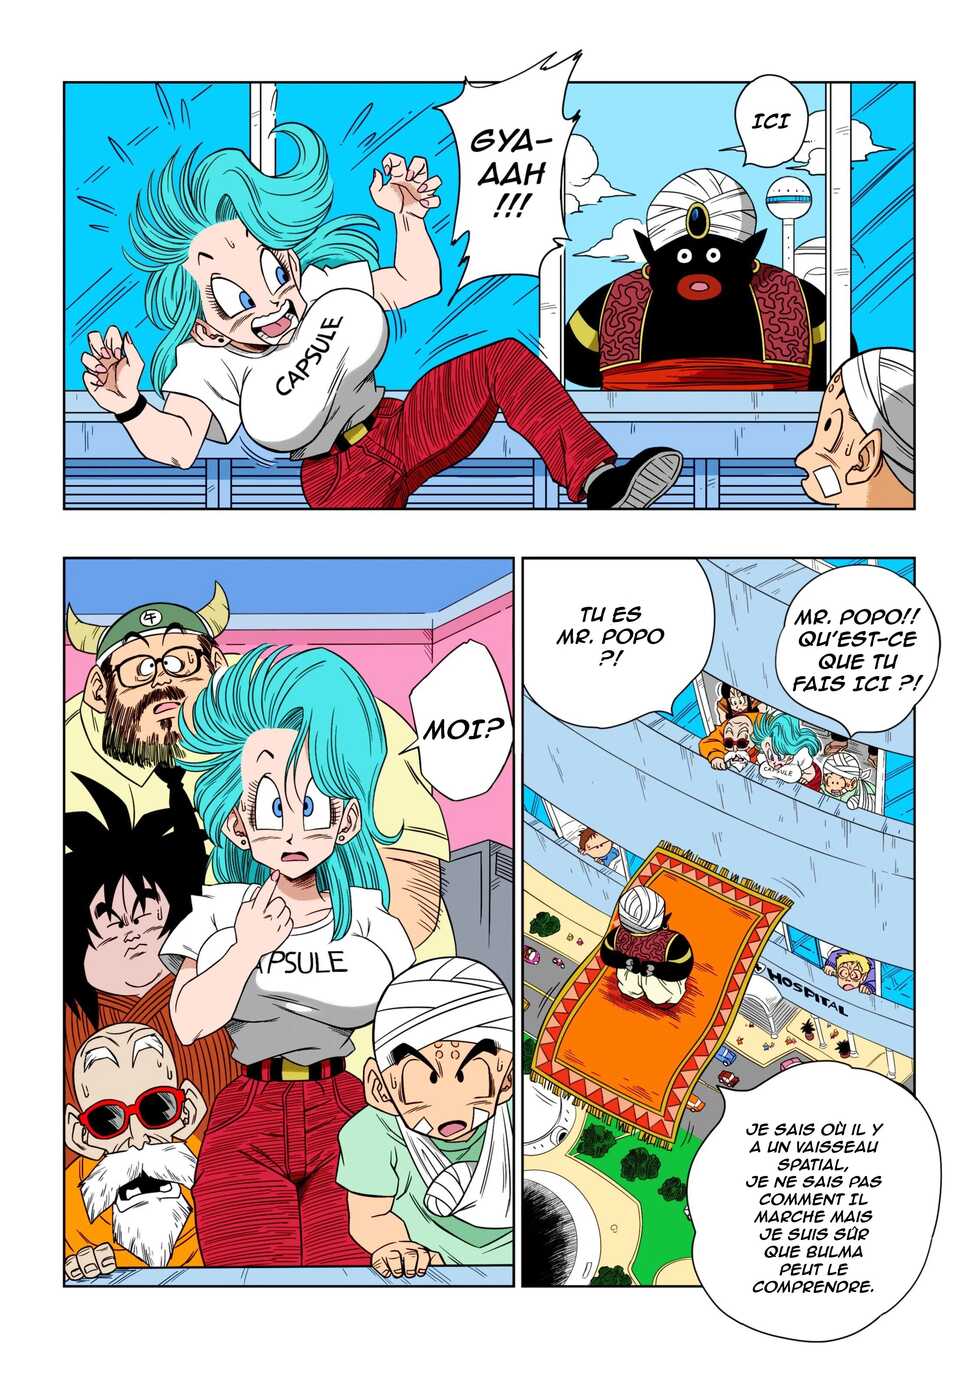 [Yamamoto] Bulma Meets Mr.Popo - Sex inside the Mysterious Spaceship! (Dragon Ball Z) [Uncensored] [FRENCH] [Colorized] - Page 2